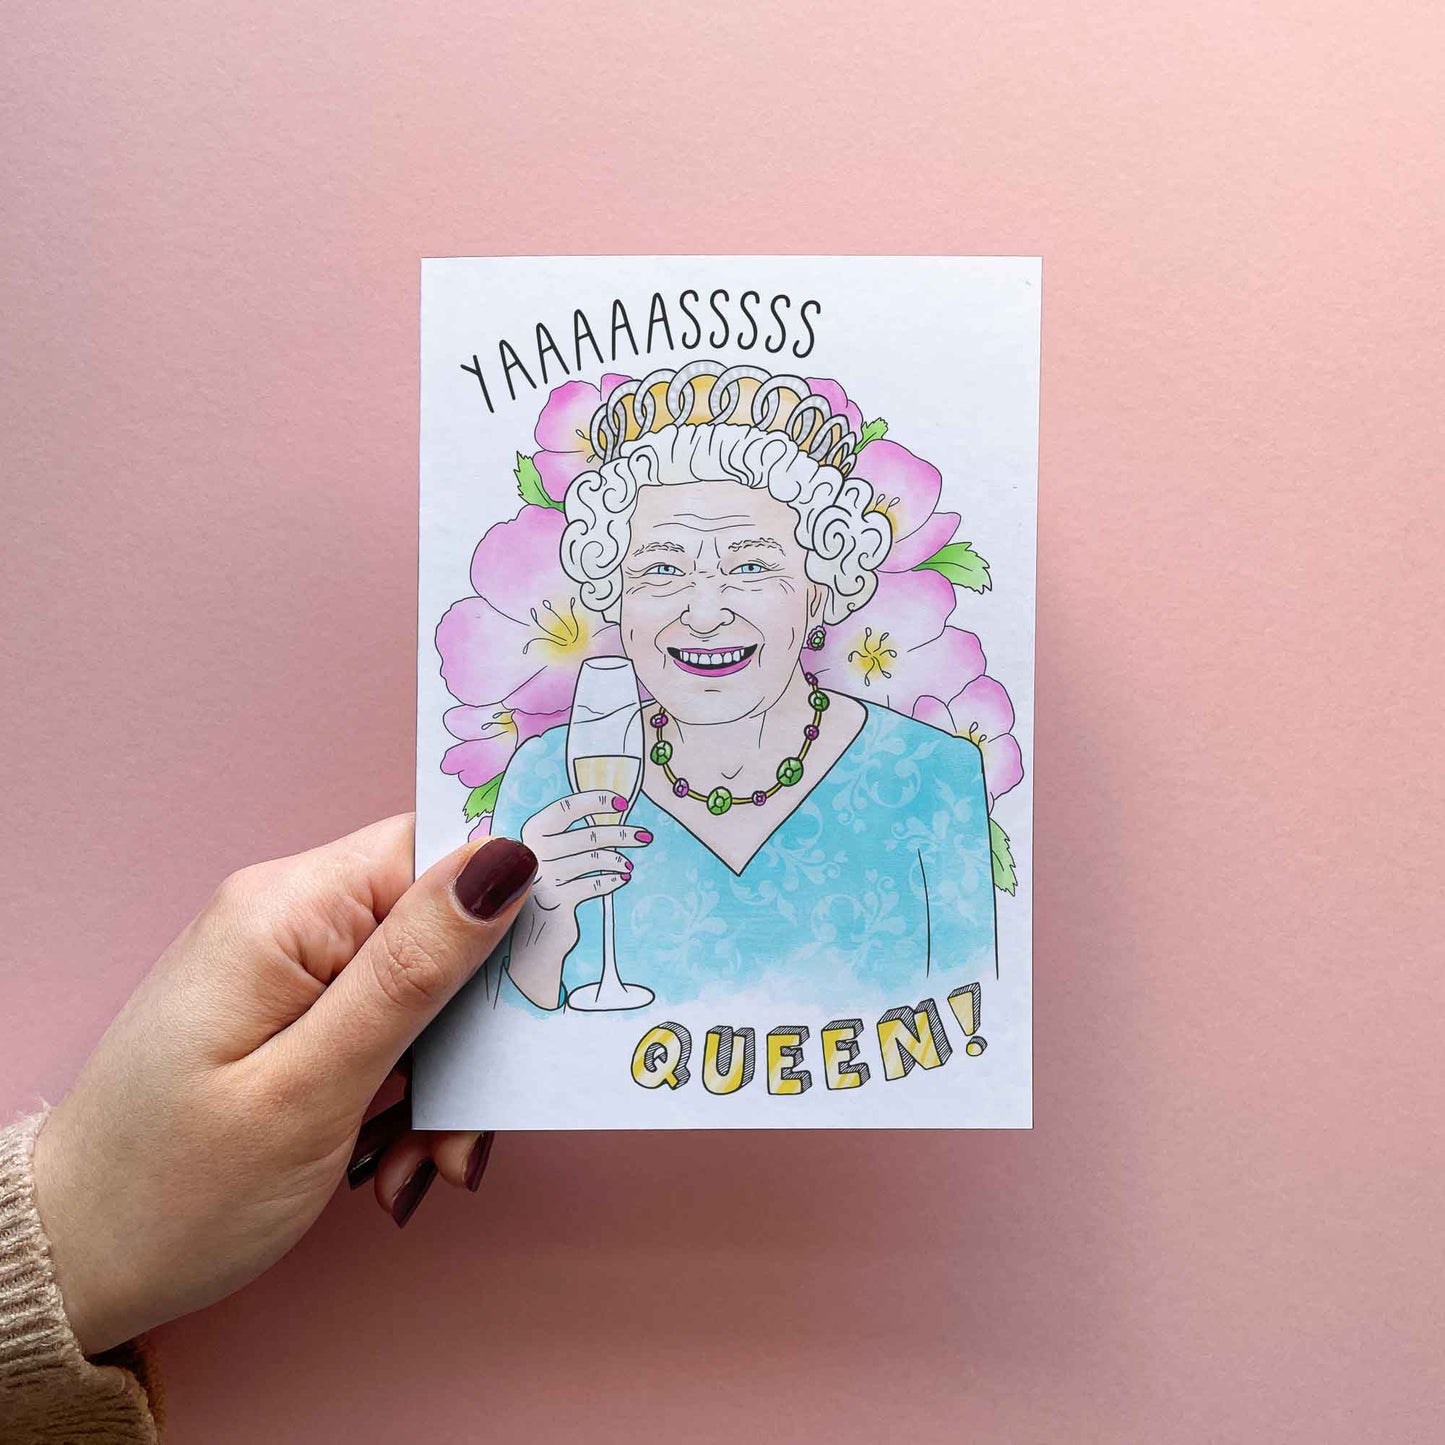 Funny Mothers day card for mum. birthday card for mum. Gift for mum. Featuring an illustration of Queen Elizabeth II, reading 'Yaaaassss Queen!'